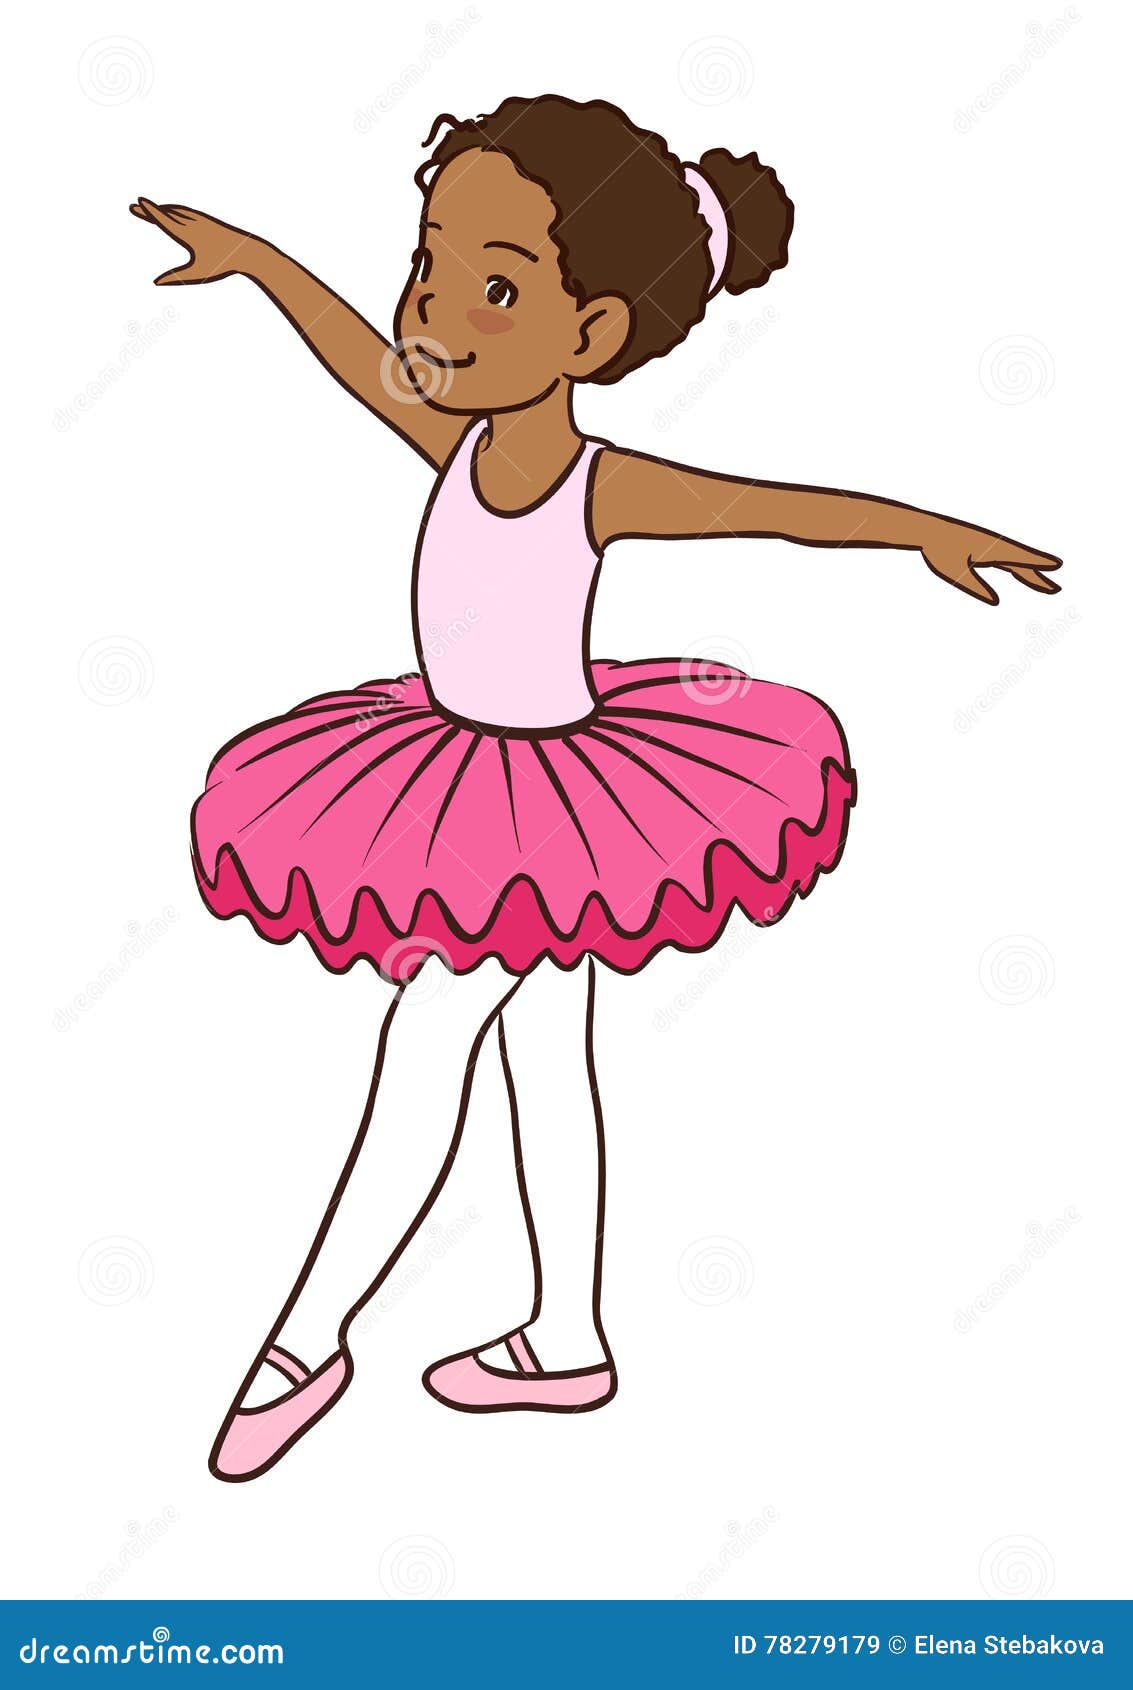 Cute Little Girl in a Ballet Outfit Stock Vector - Illustration of  character, back: 78279179